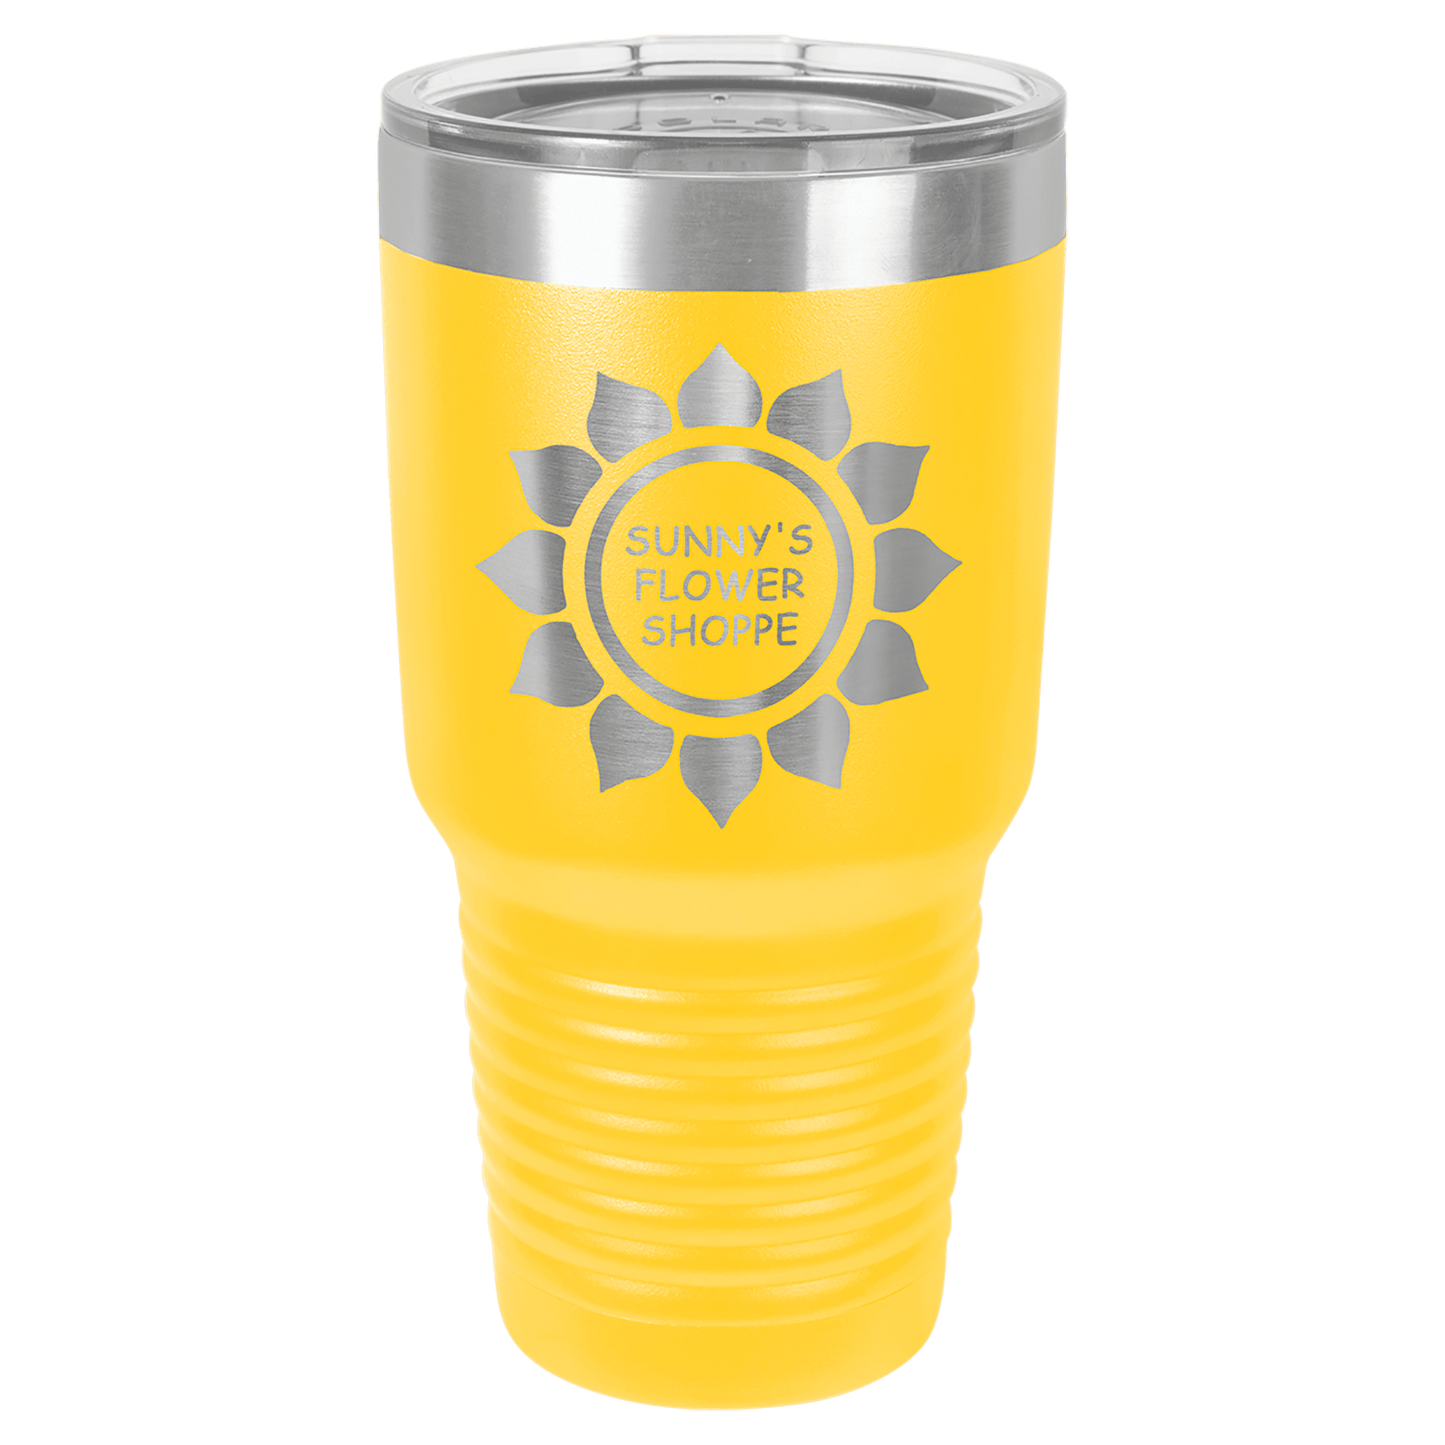 Tumblers, beverage holders, wine glasses, water bottles, sippy cups, and more